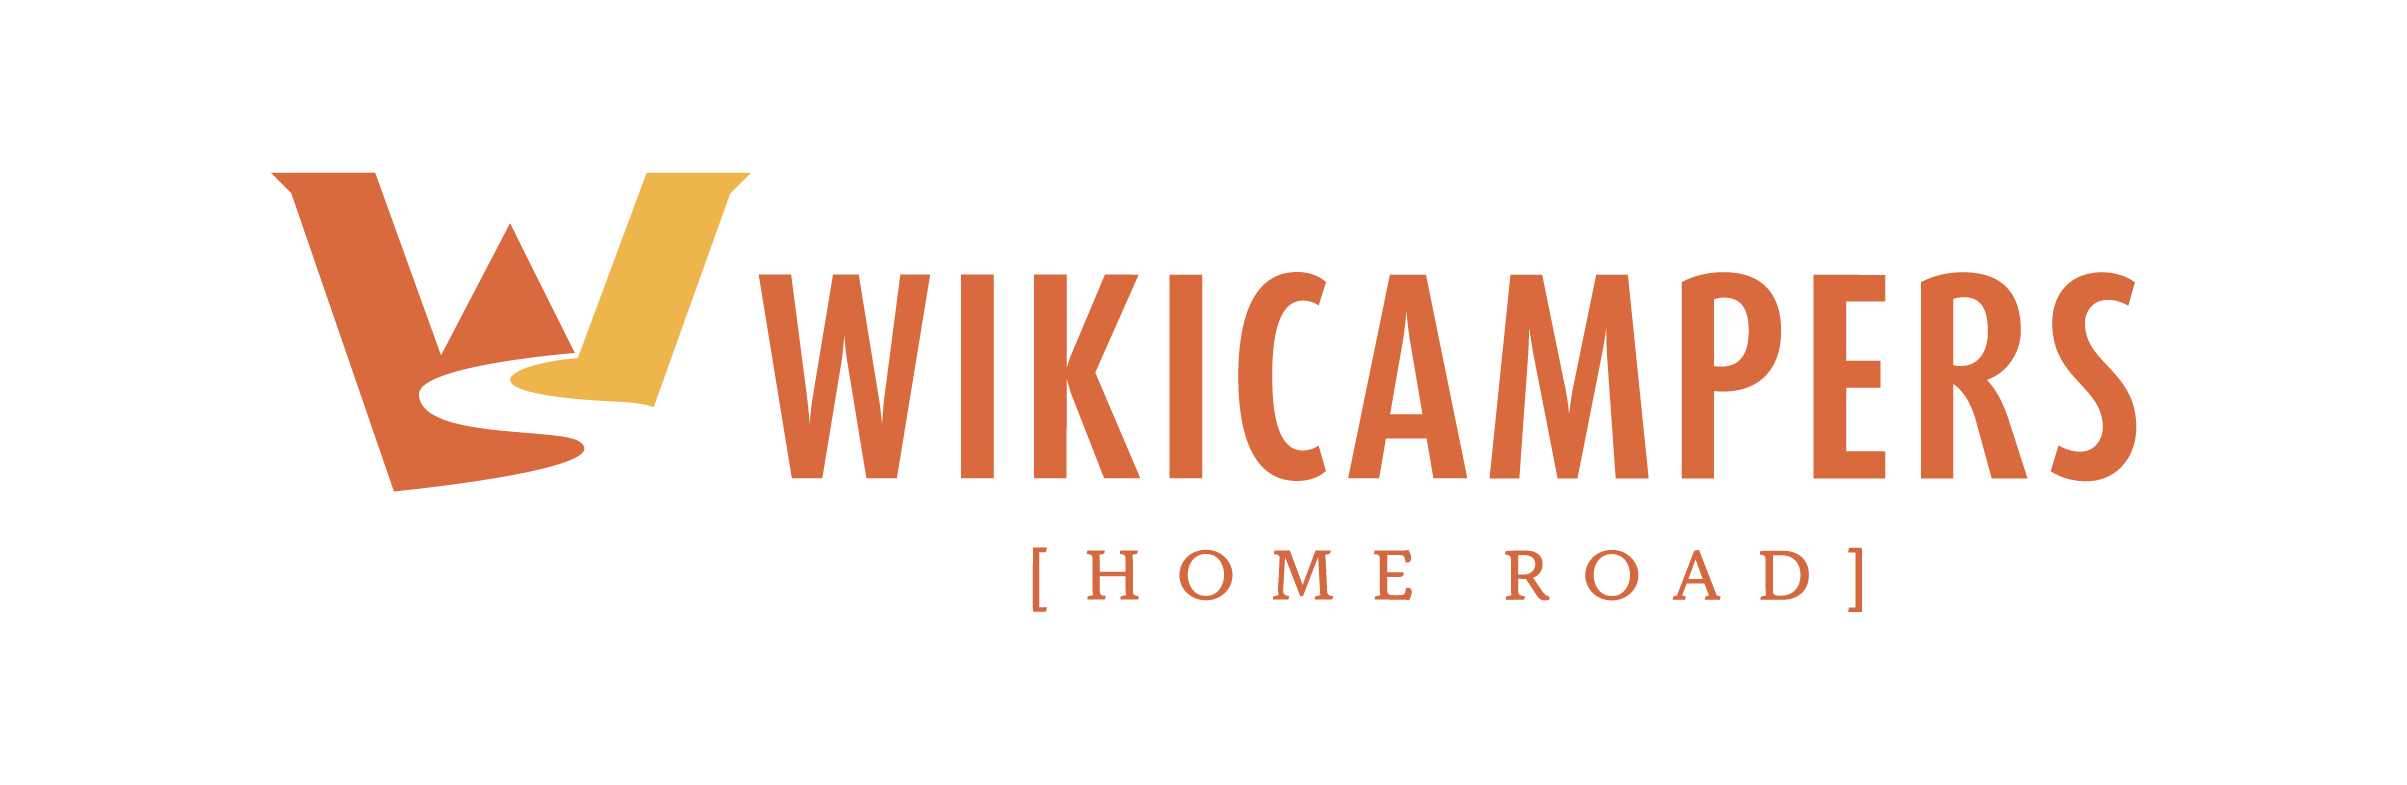 wikicampers location de camping-car